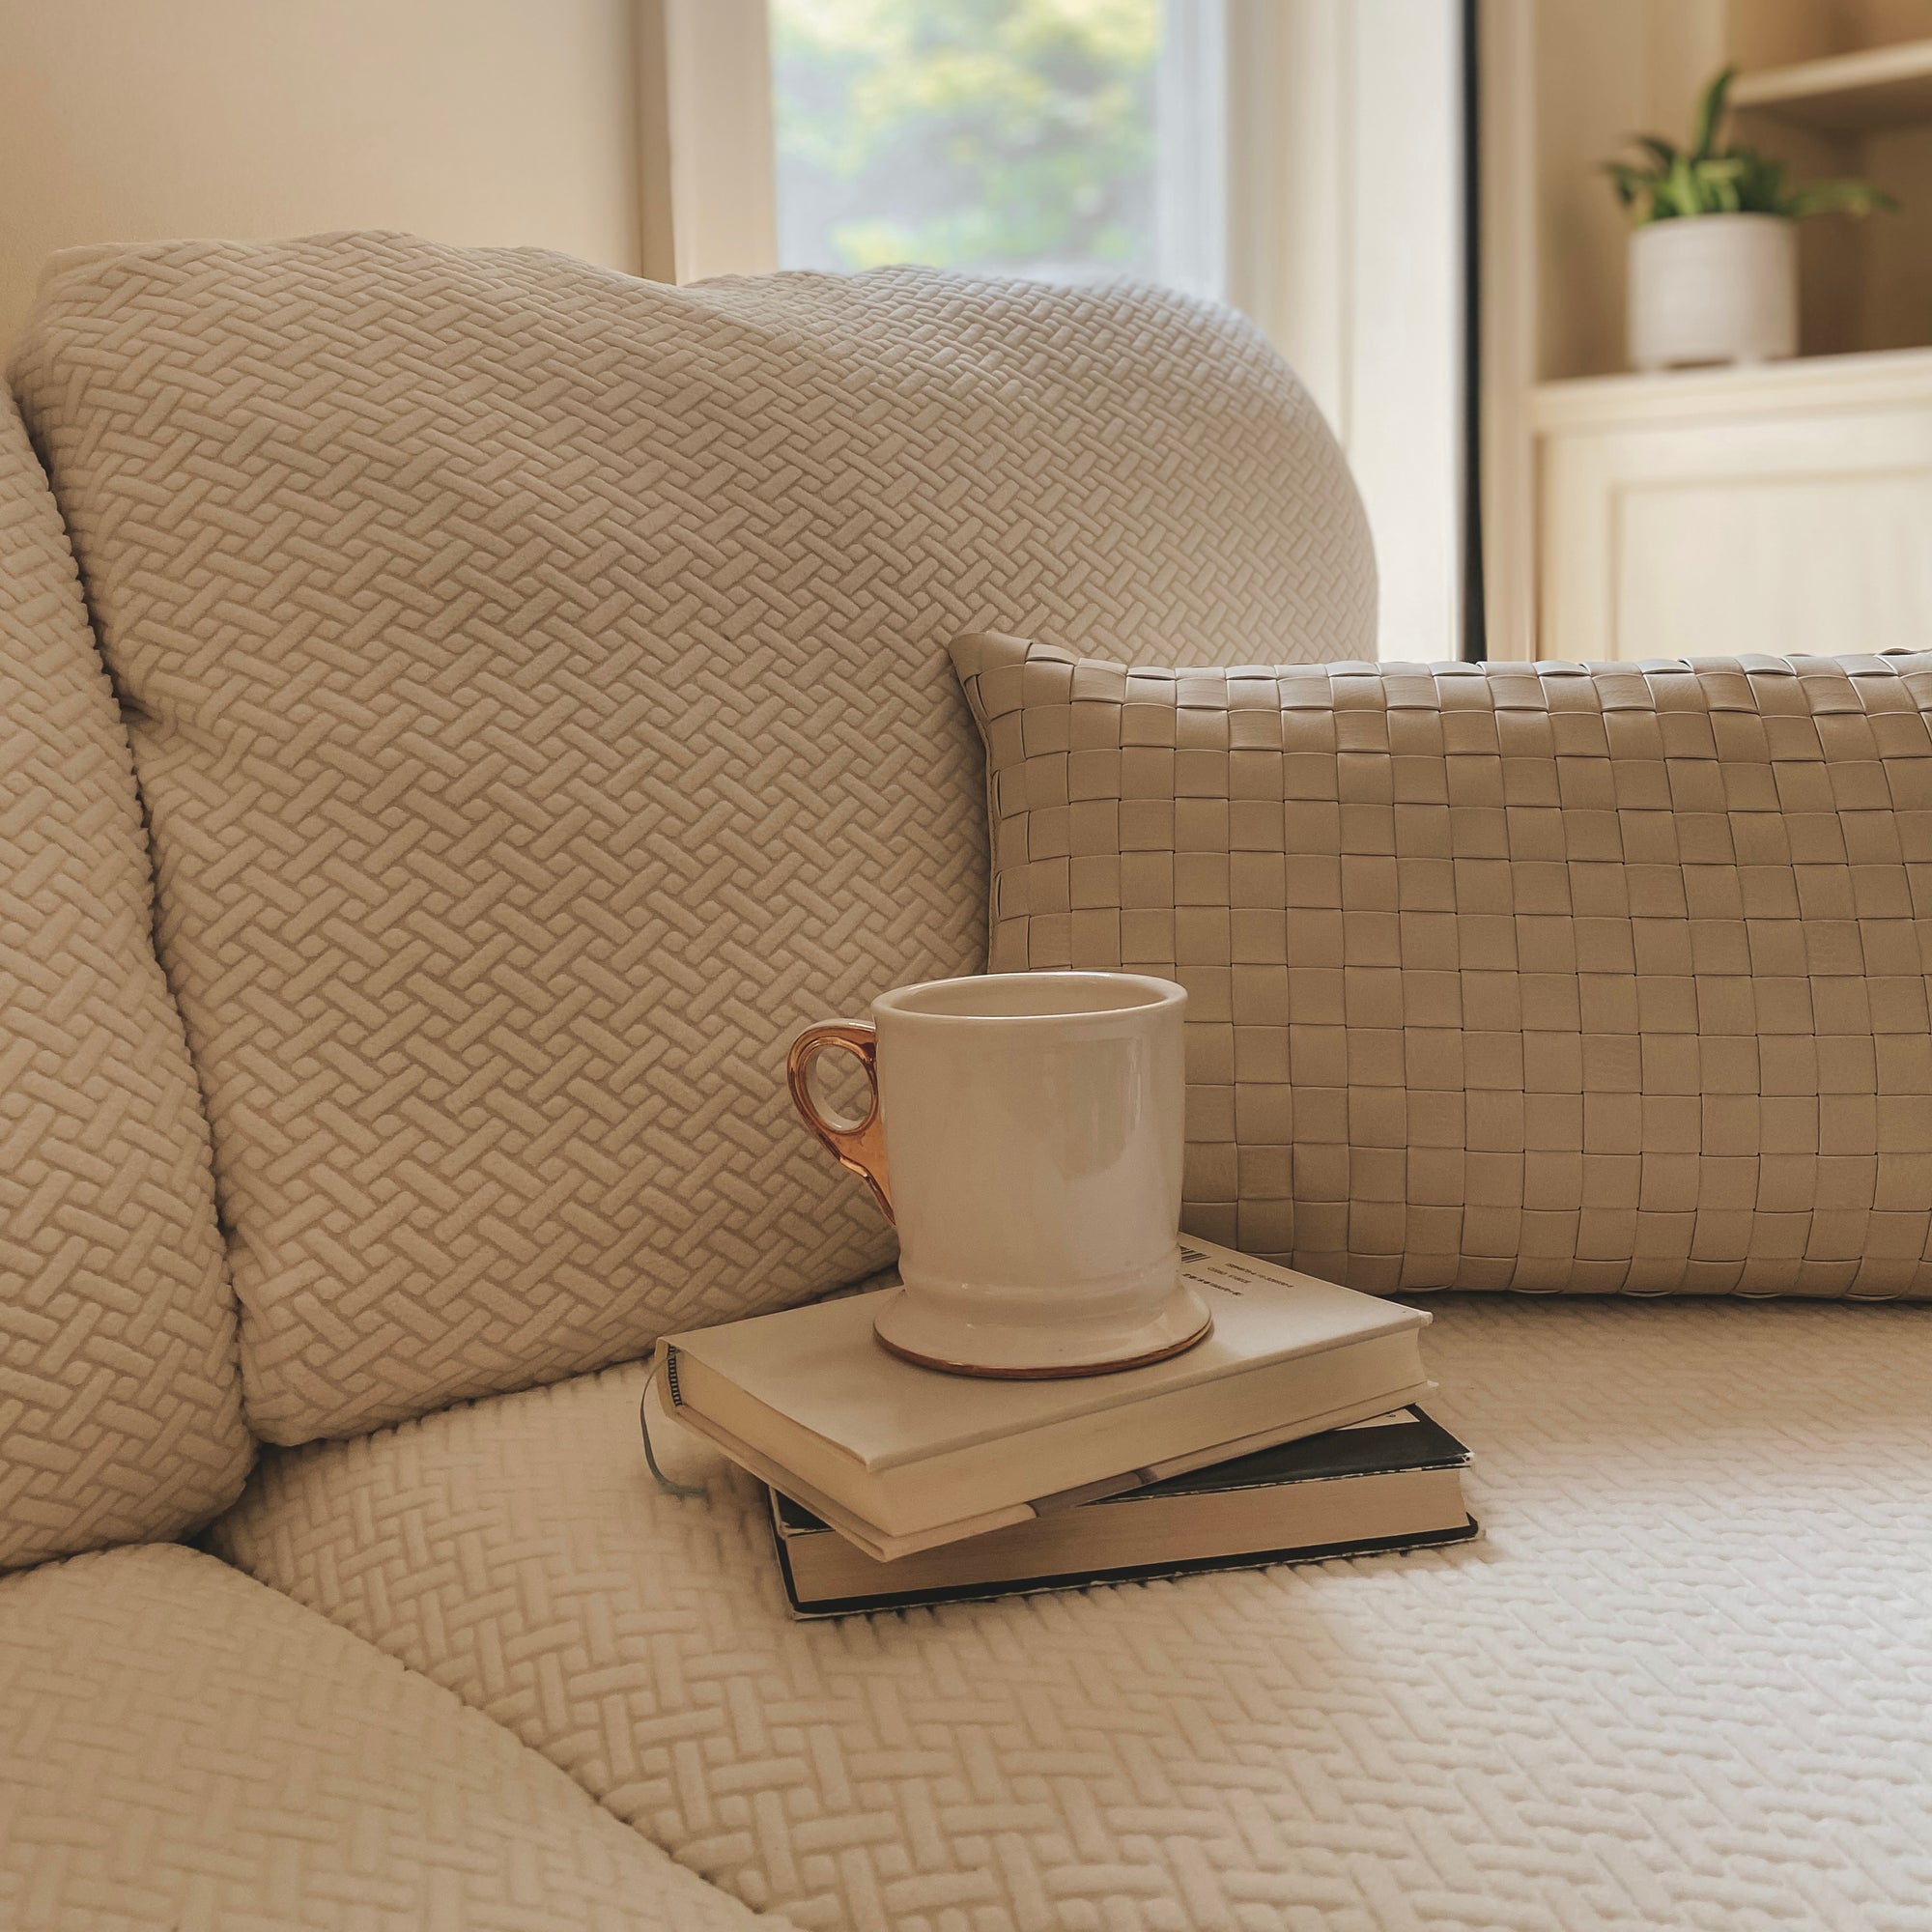 5 Reasons a Slipcover is a Must-Have for Your Sofa - Nolan Interior